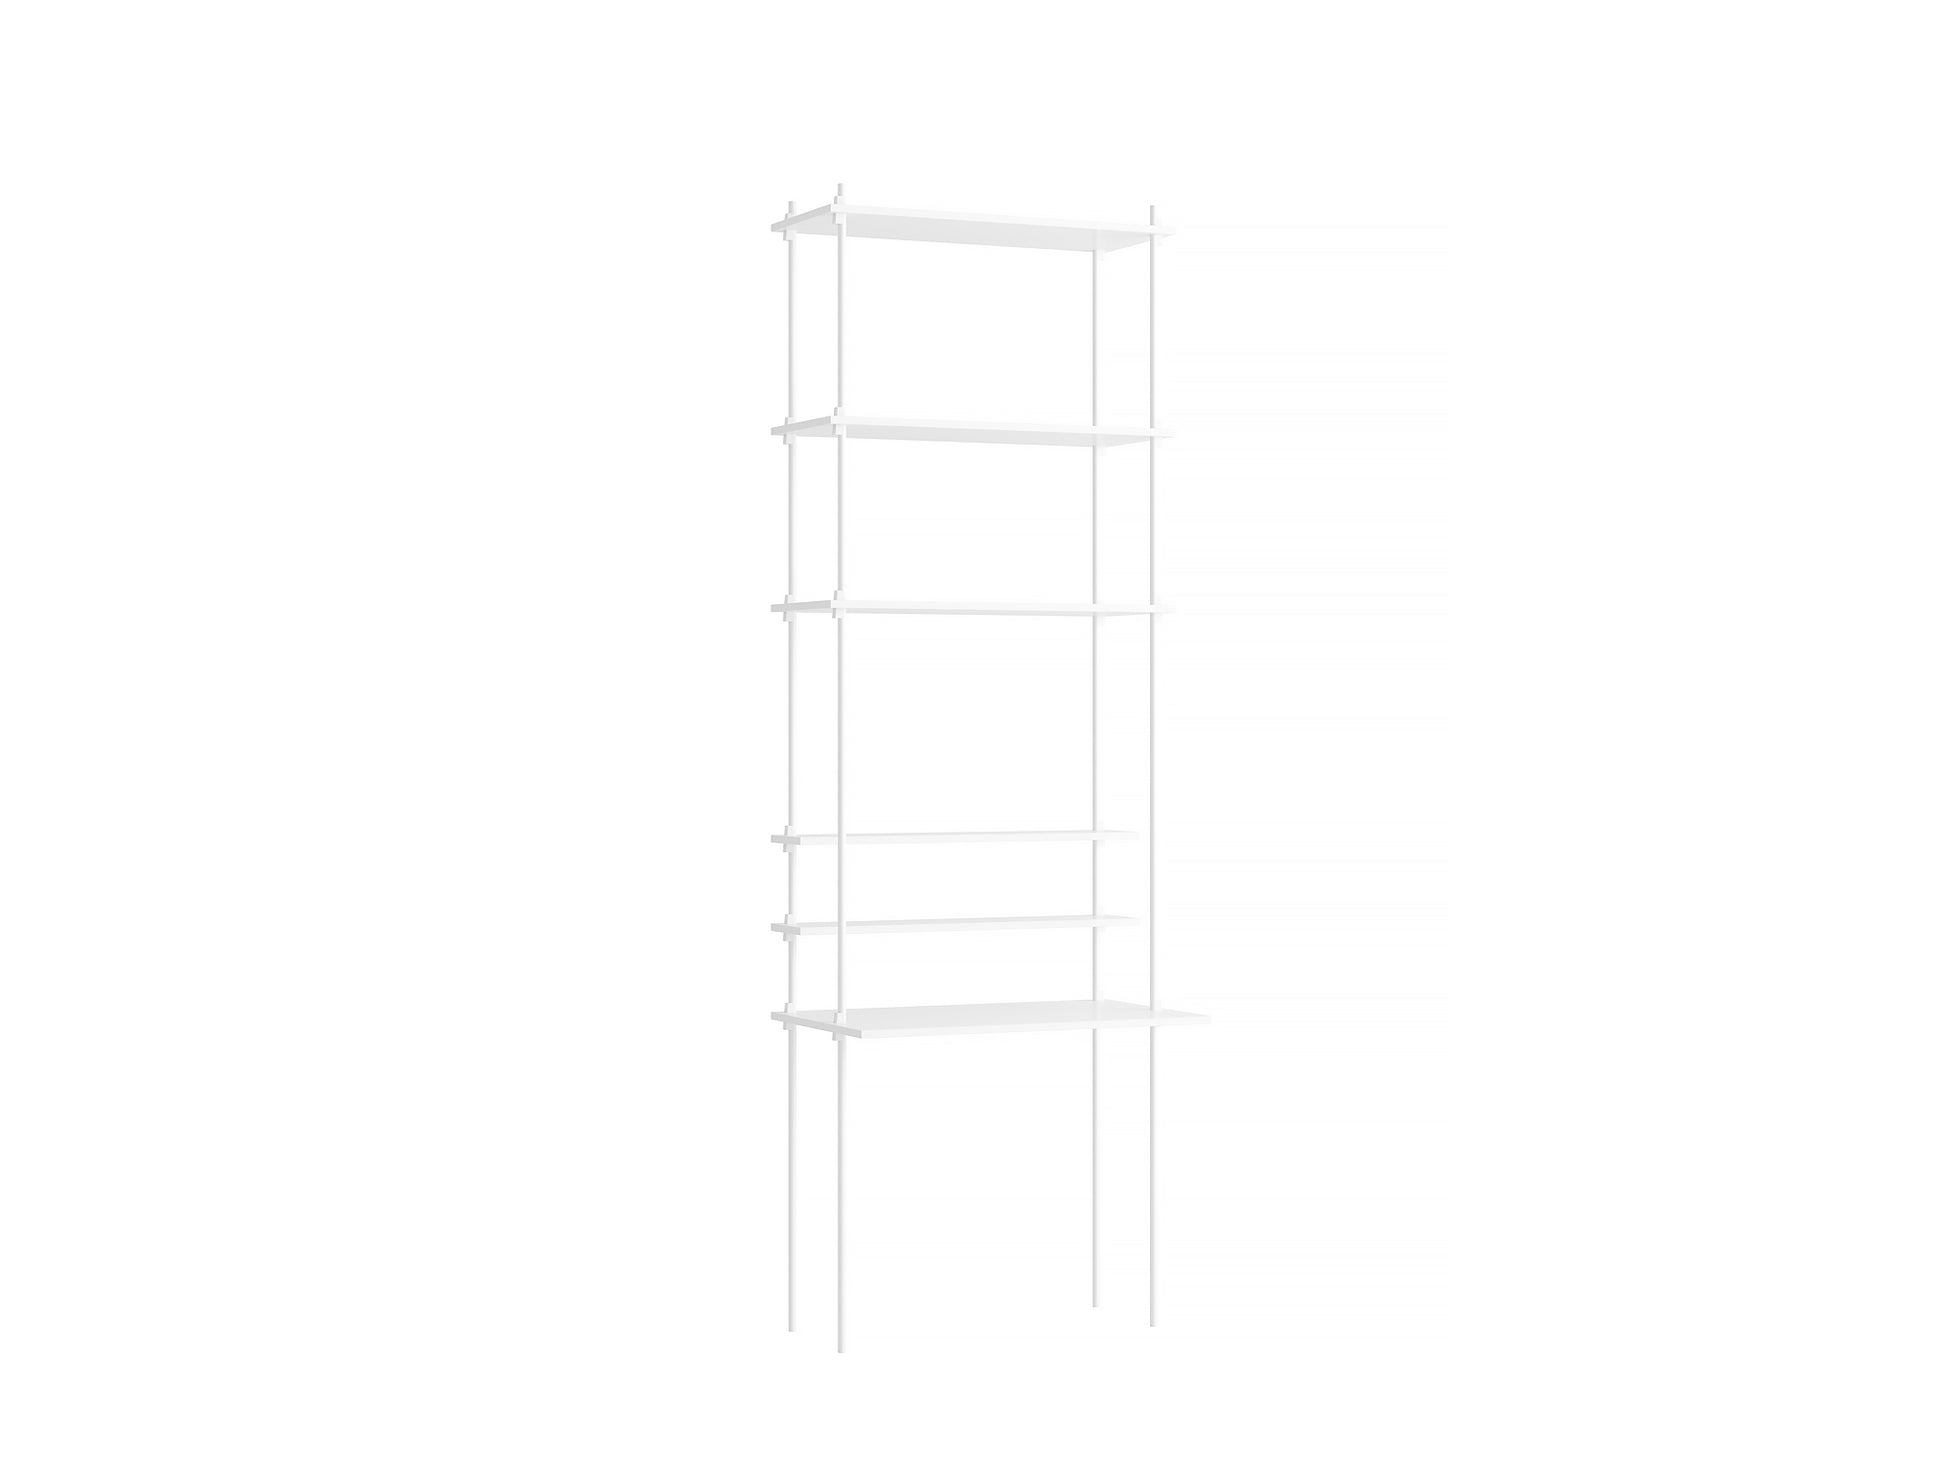 Moebe Shelving System - S.255.1.E Set in White / White Lacquered Finish